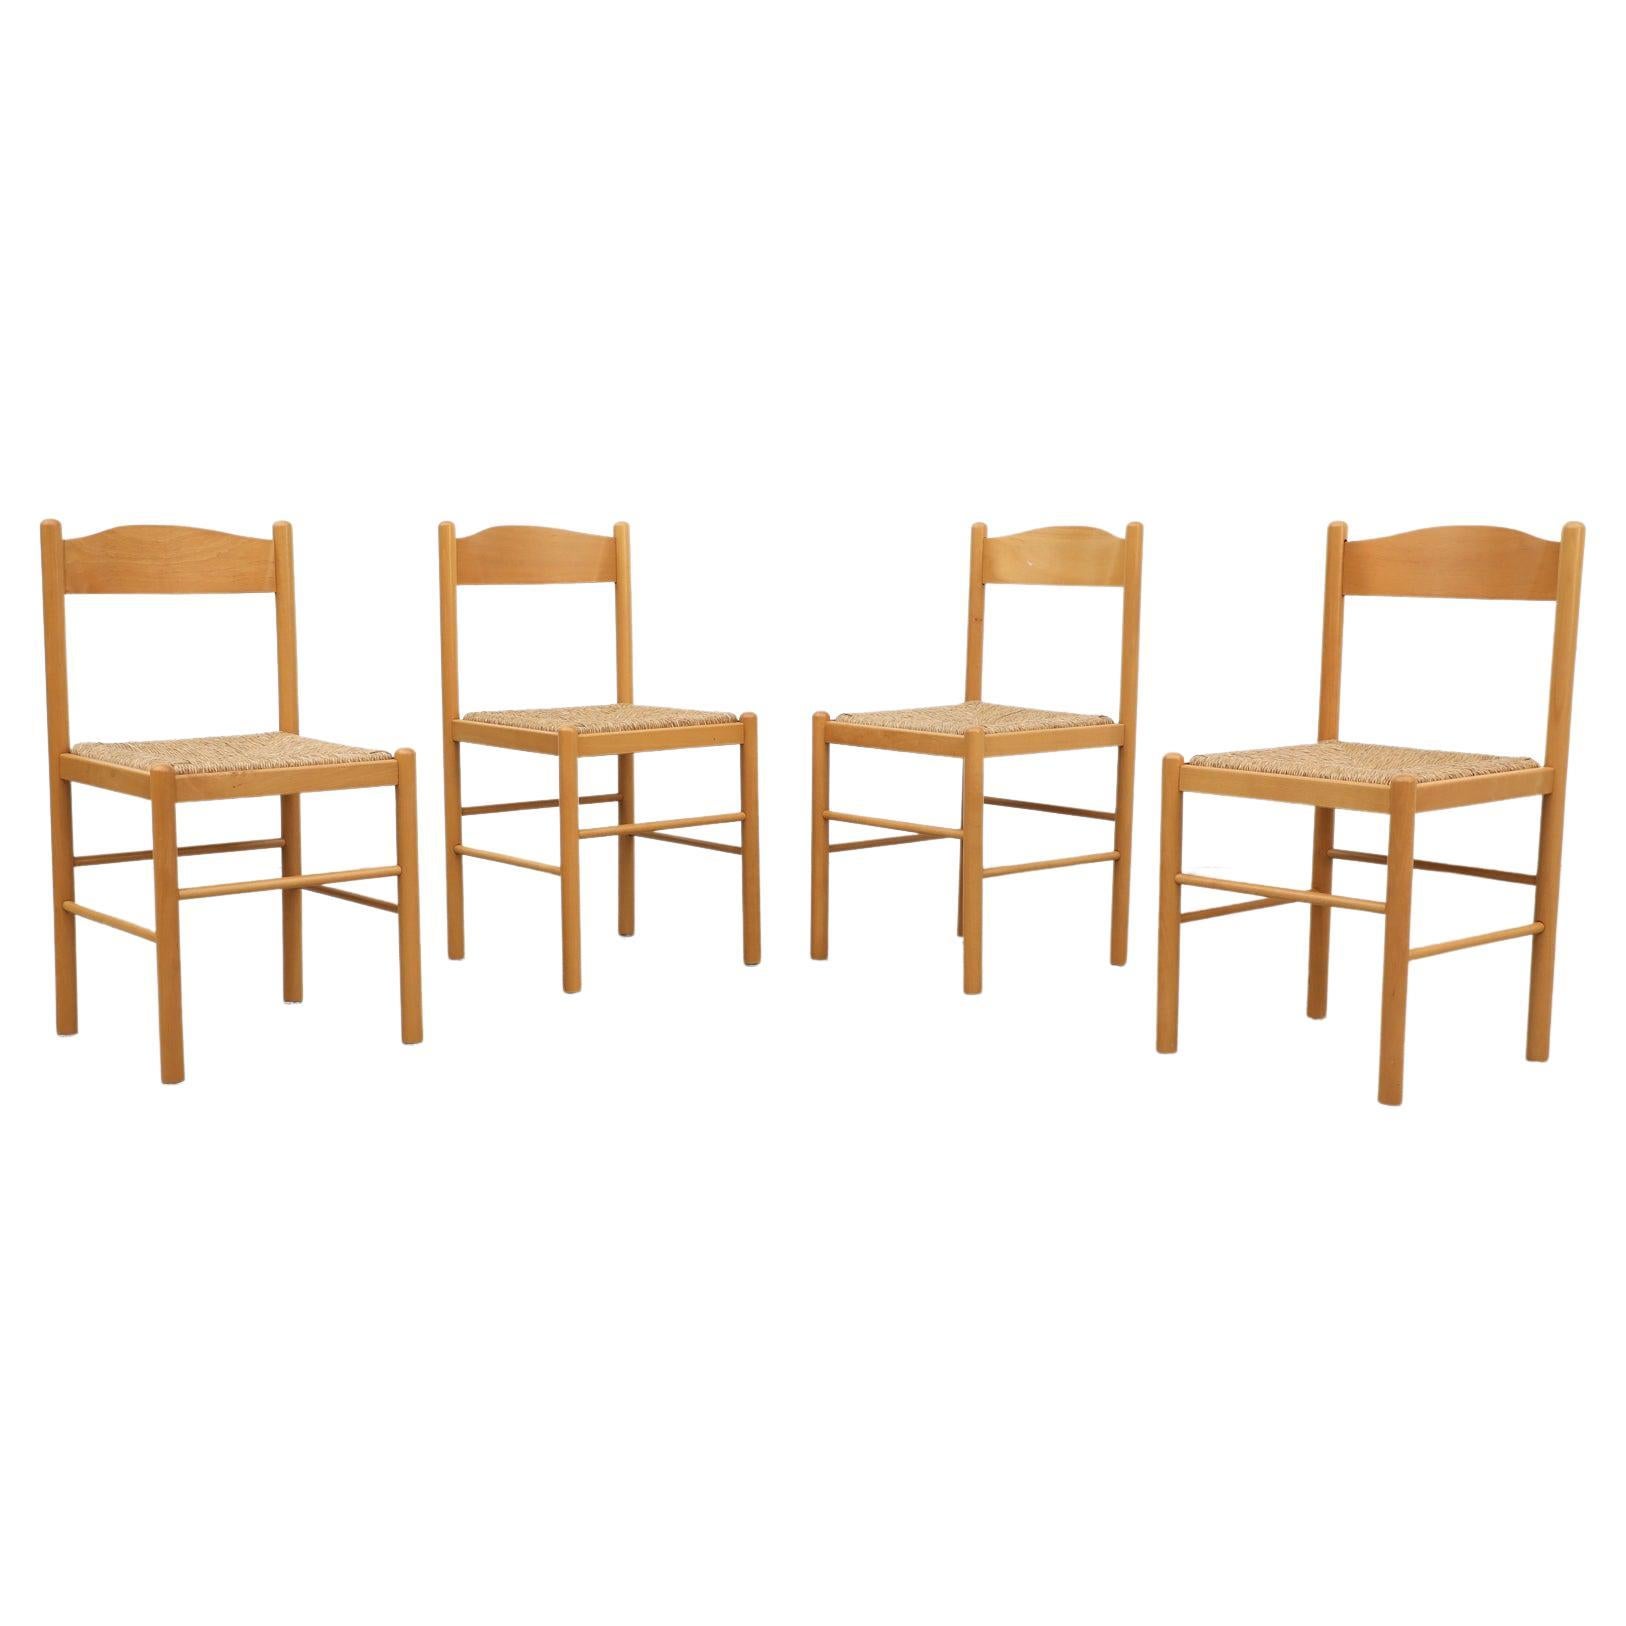 Set of 4 Blonde Wood Vico Magistretti Style Dining Chairs w/ Rush Seats